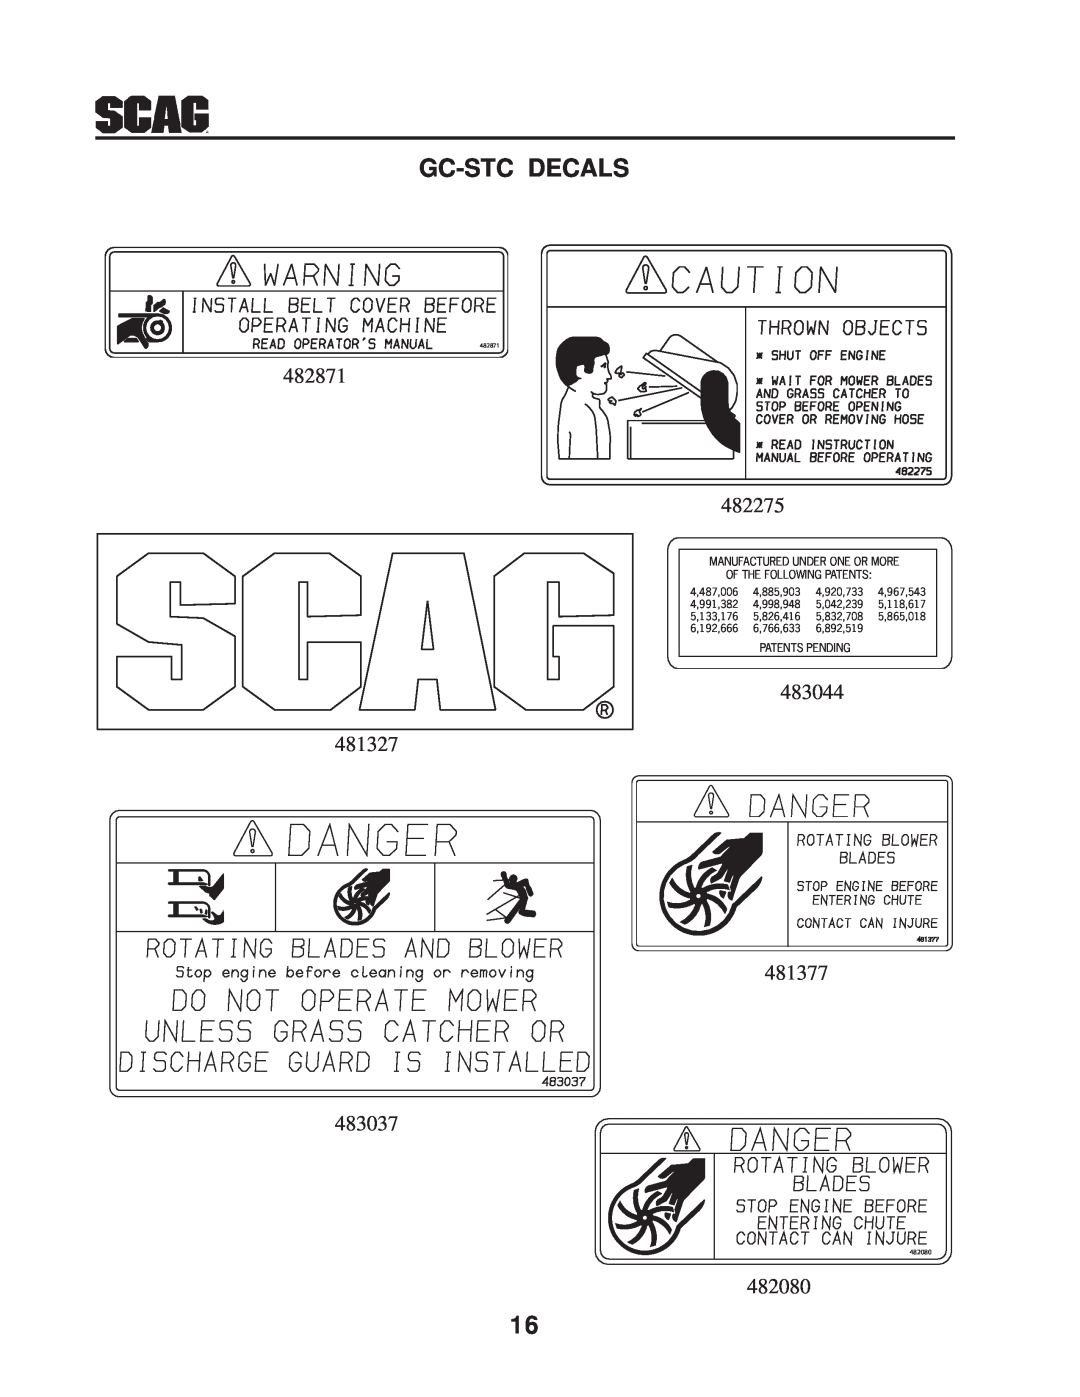 Scag Power Equipment GC-STWC-61V Gc-Stc Decals, Manufactured Under One Or More Of The Following Patents, Patents Pending 